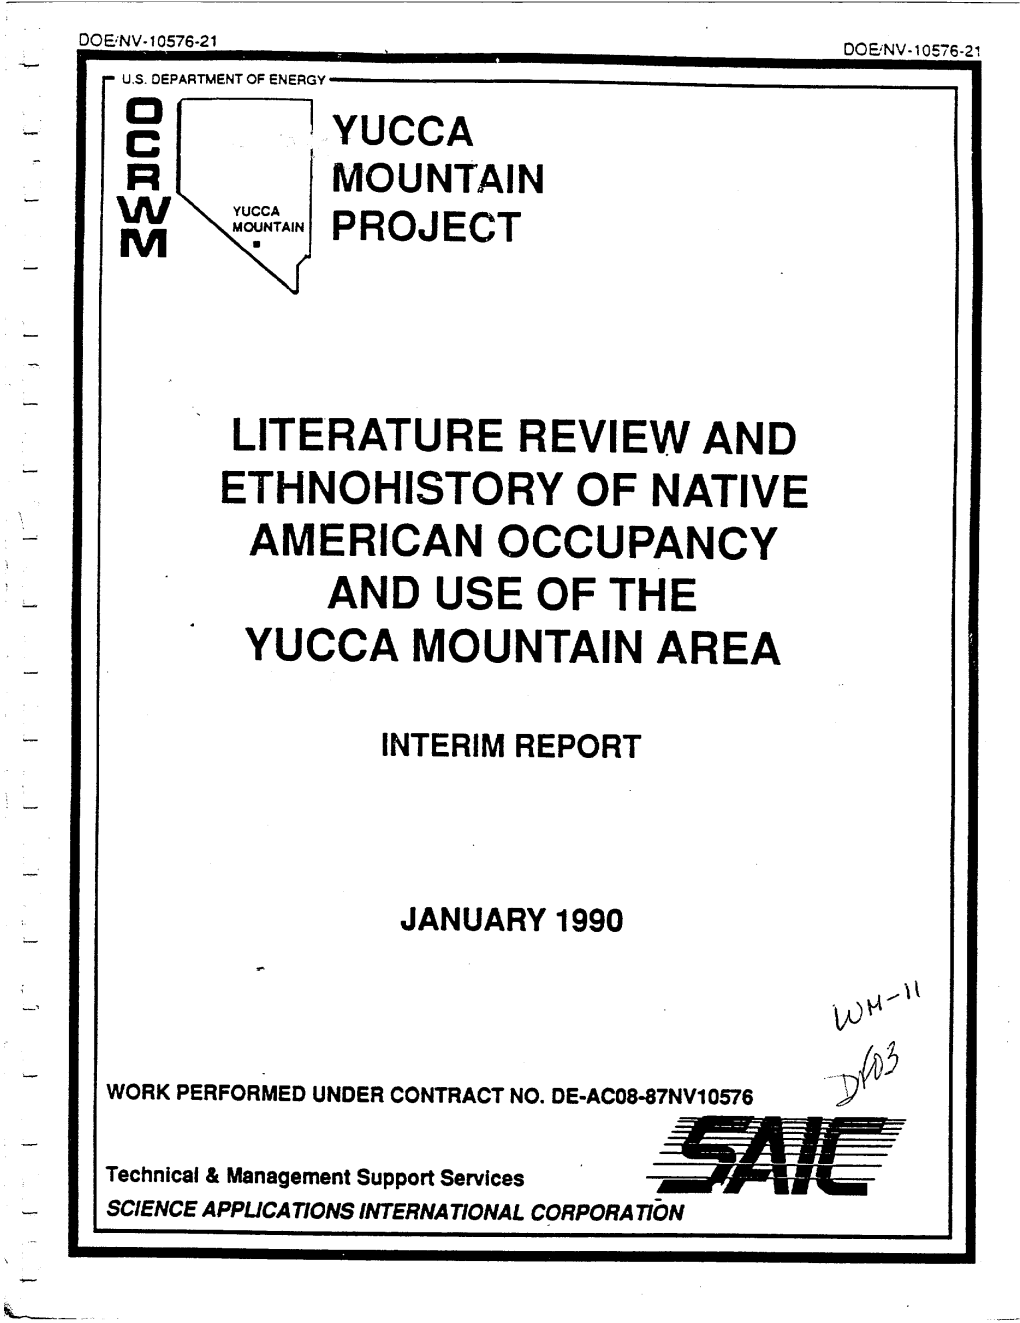 Literature Review and Ethnohistory of Native American Occupancy and Use of the Yucca Mountain Area